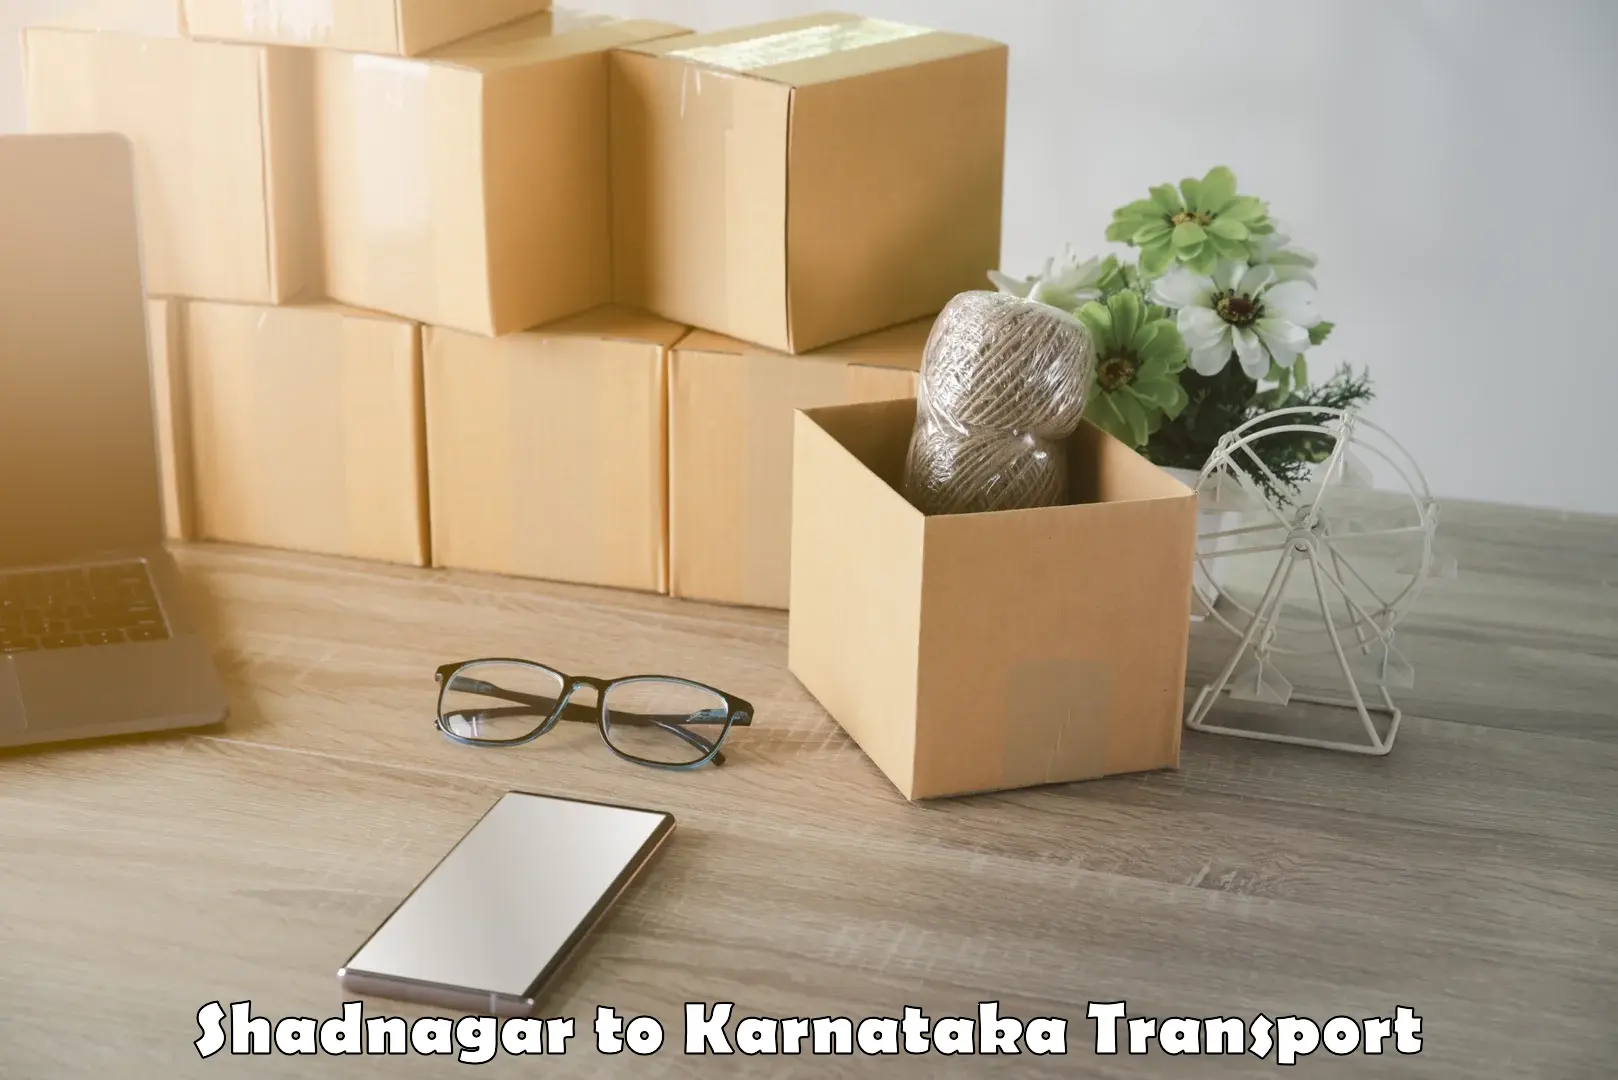 Inland transportation services in Shadnagar to Belthangady